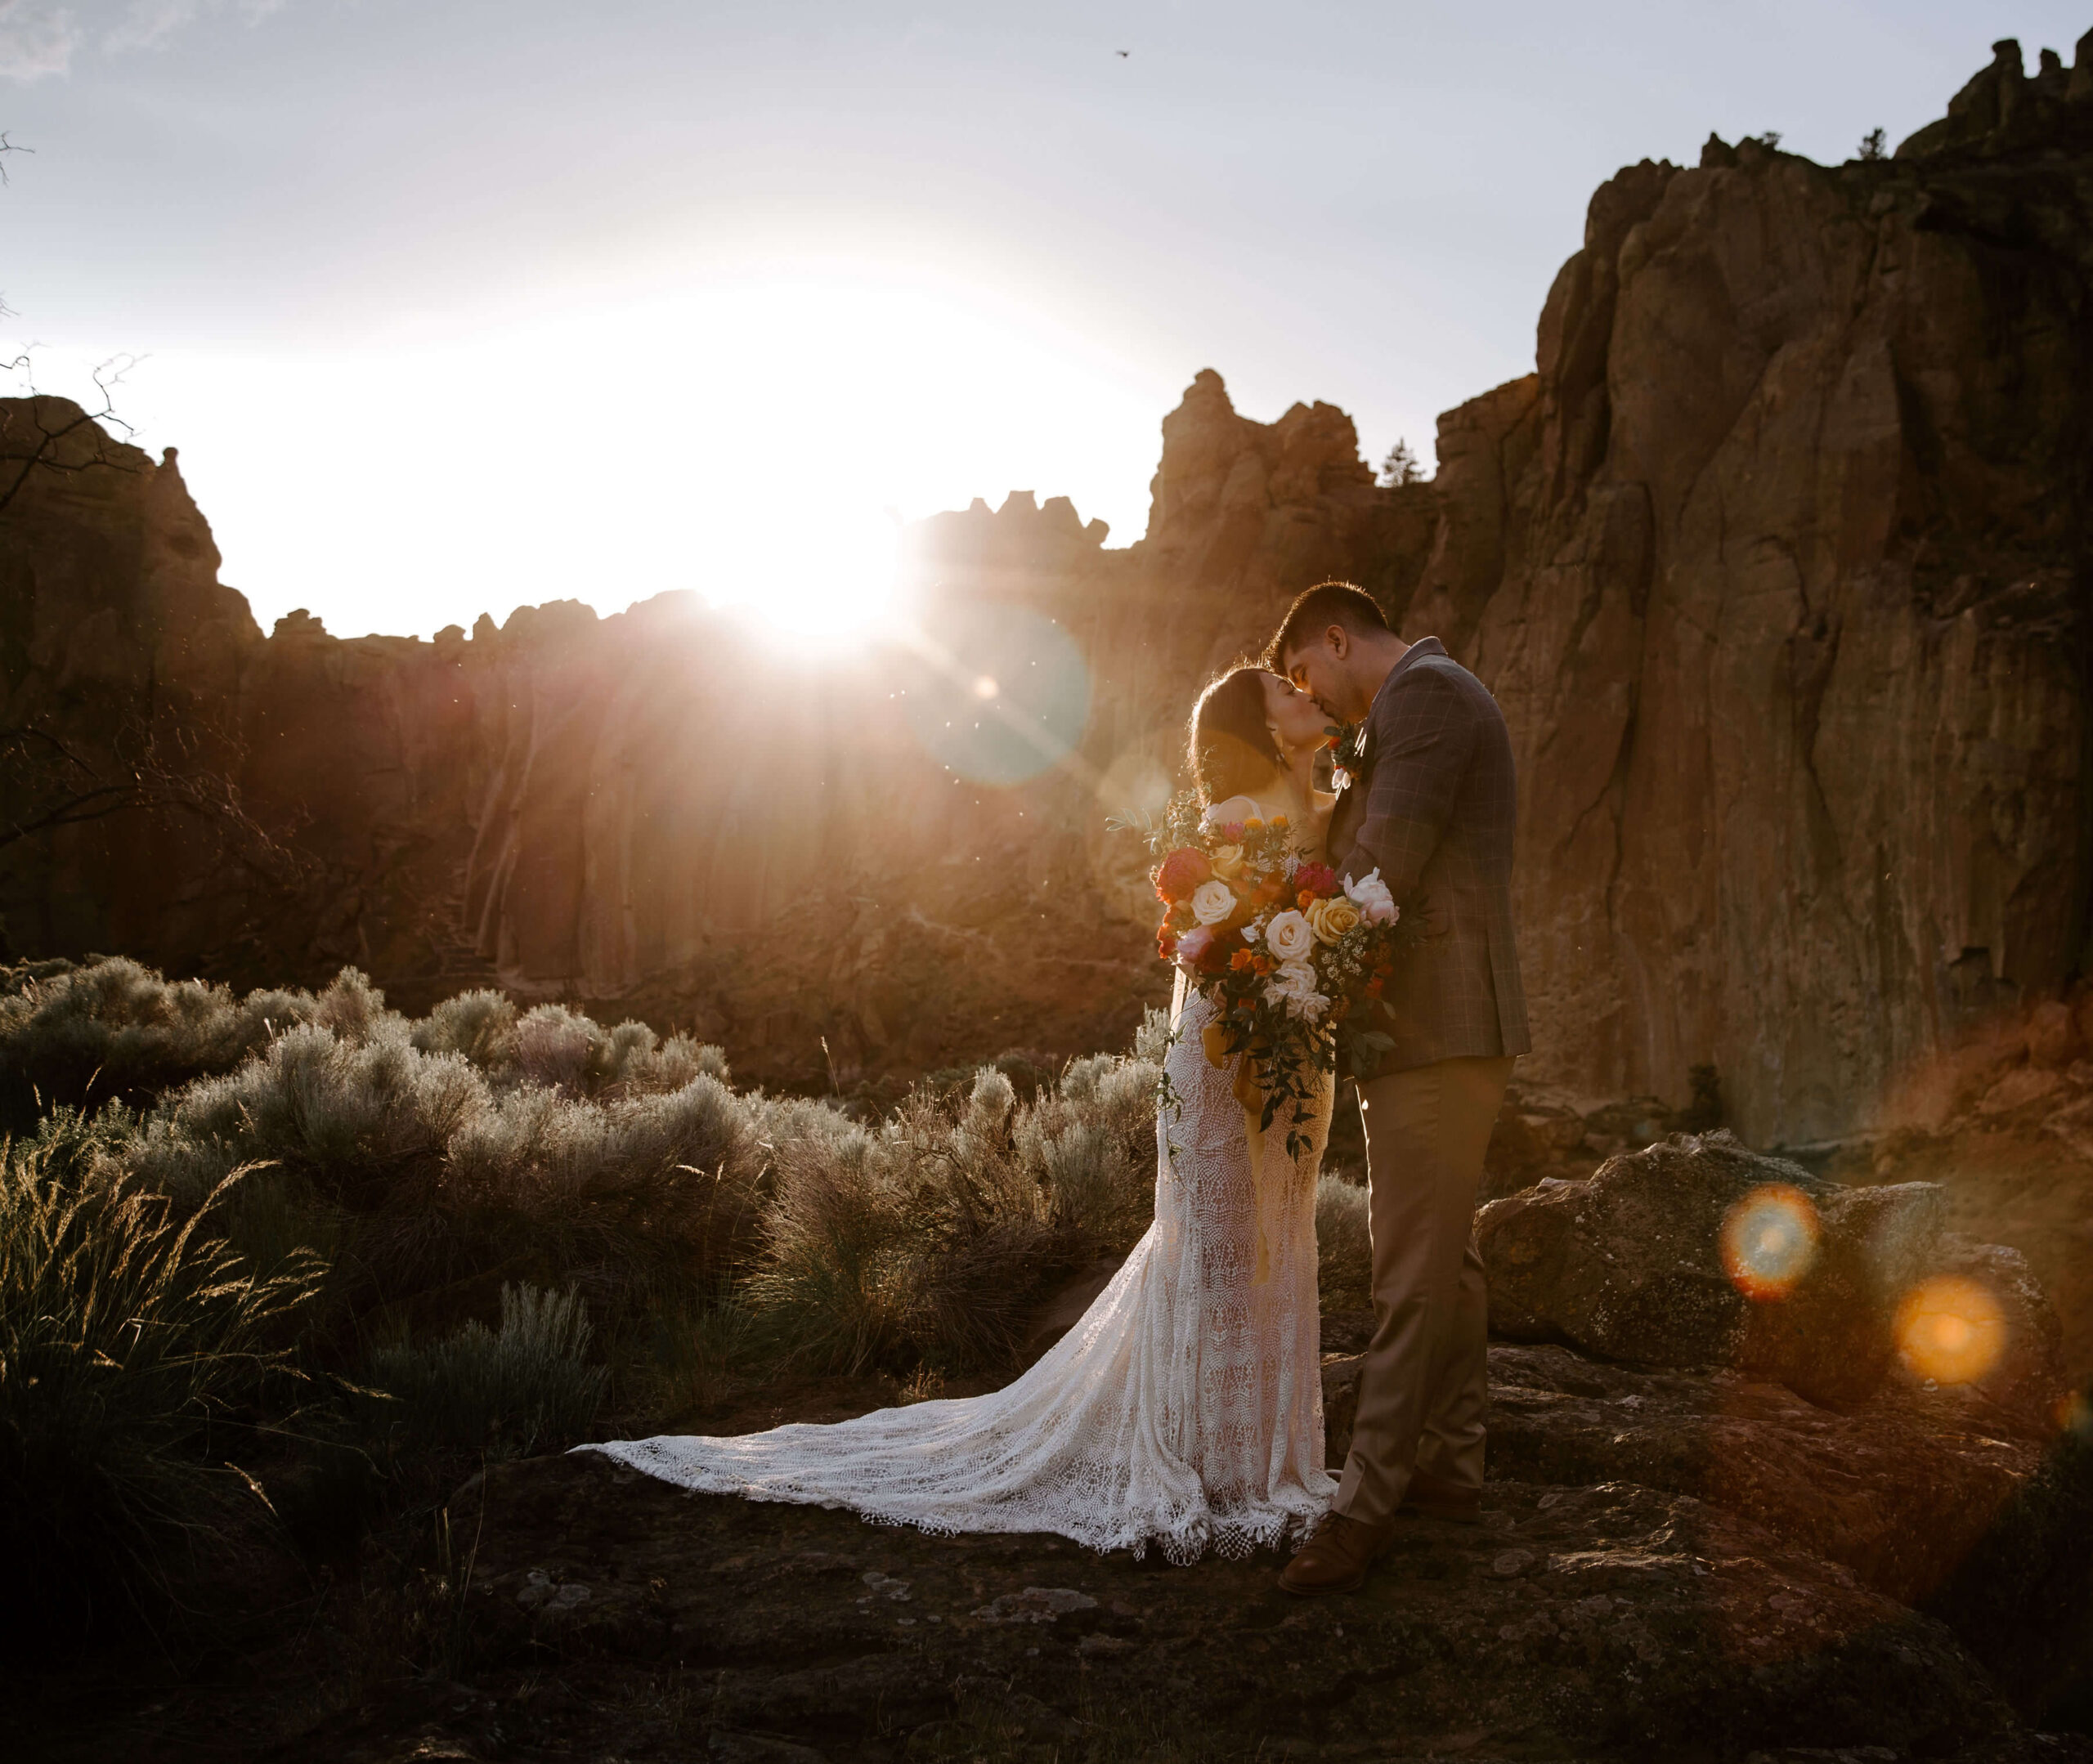 Couple elopes at smith rock in oregon at sunset